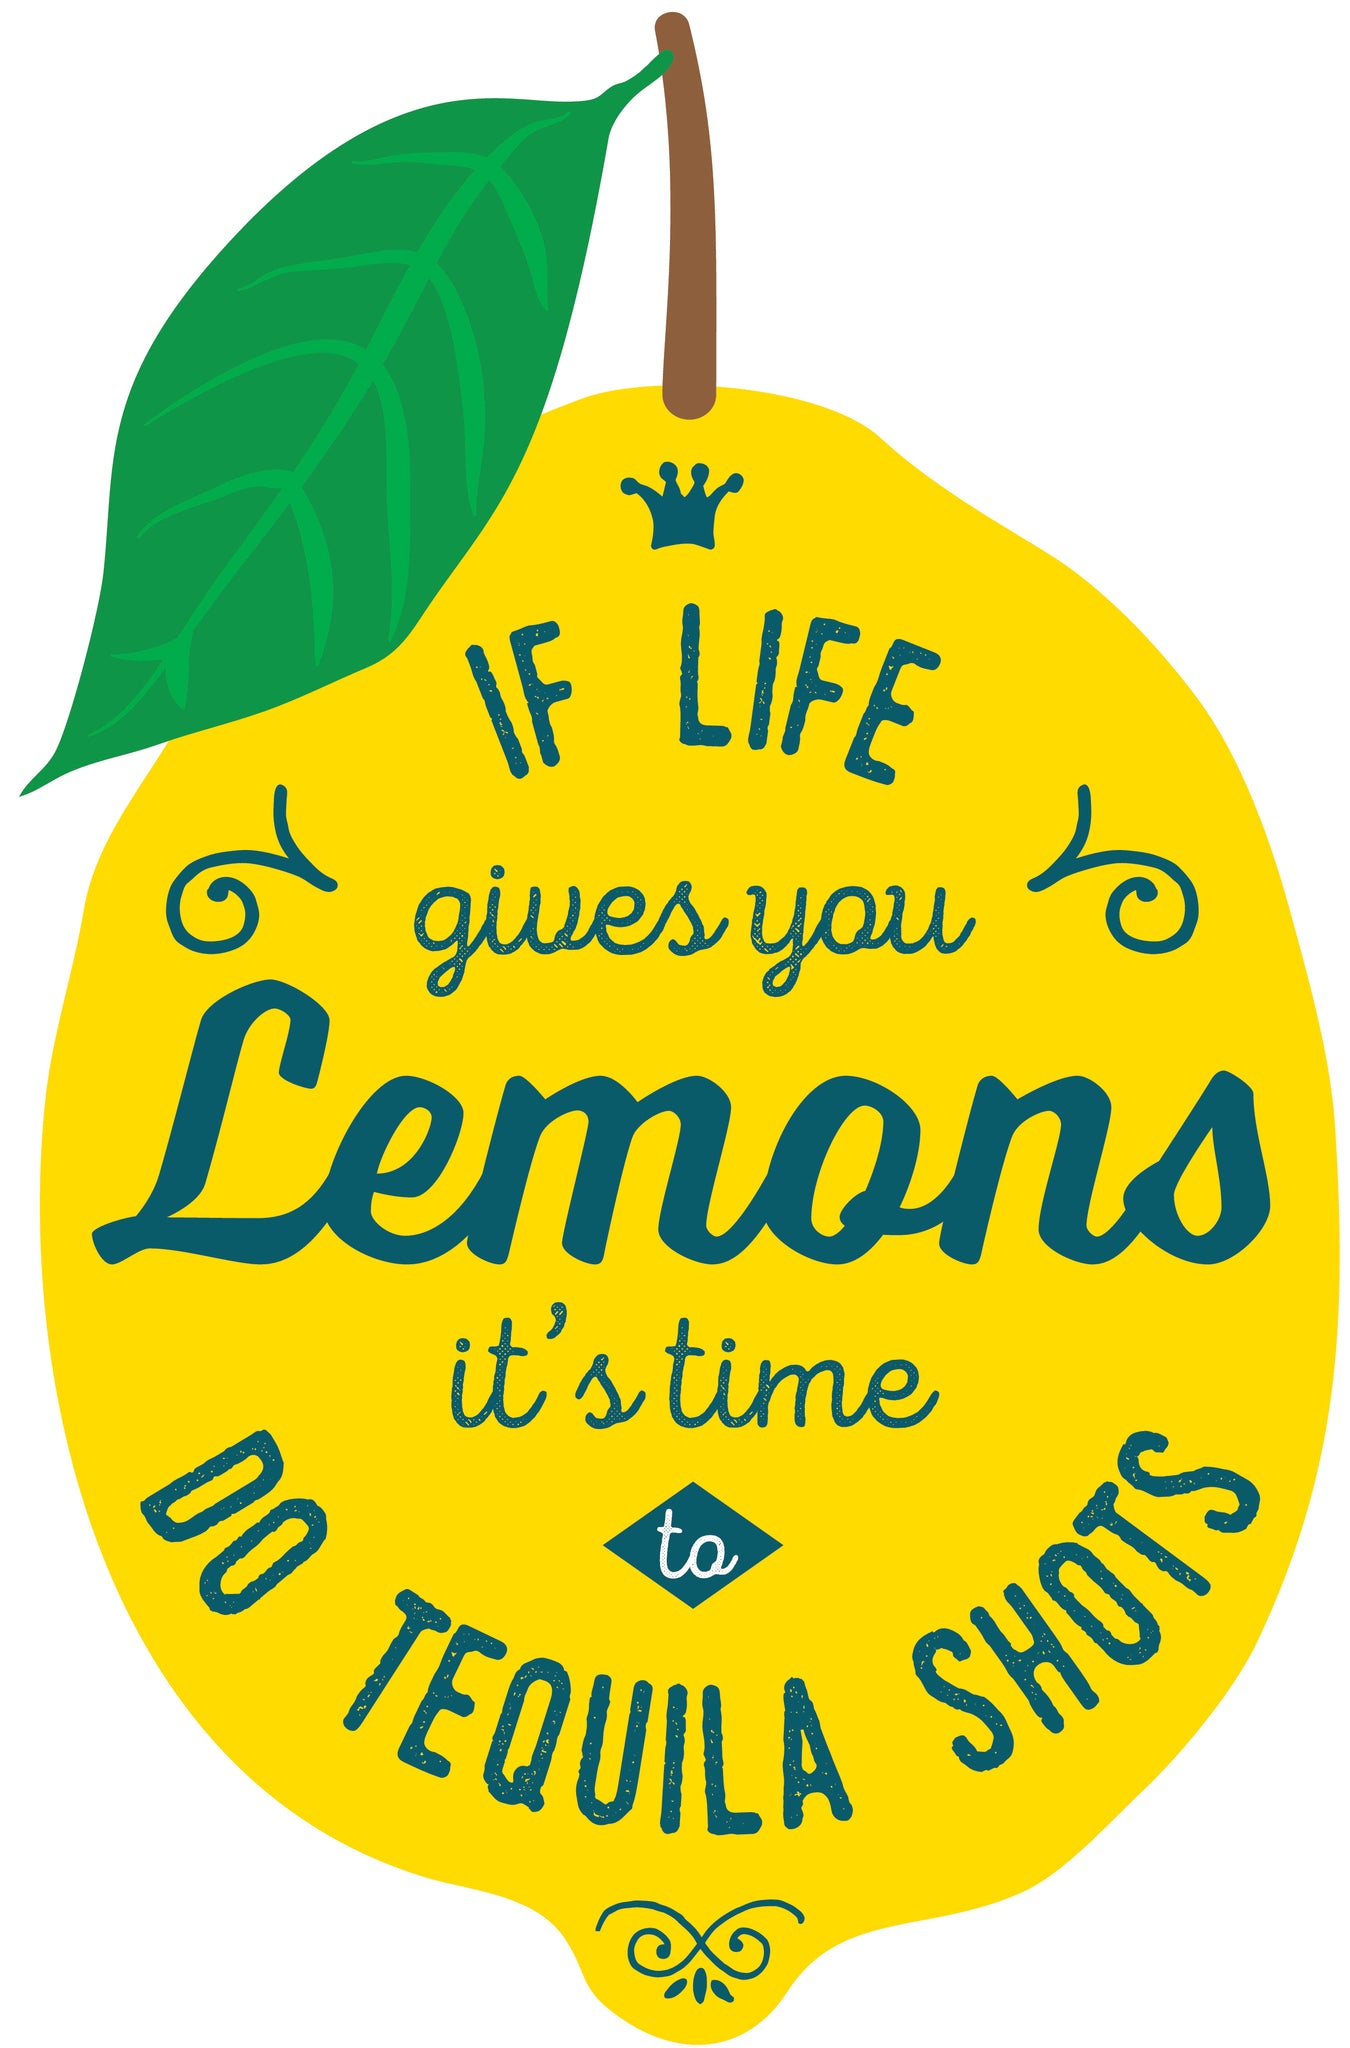 If Life Gives You Lemons It's Time to Do Tequila Shots Lemon Icon Vinyl Decal Sticker